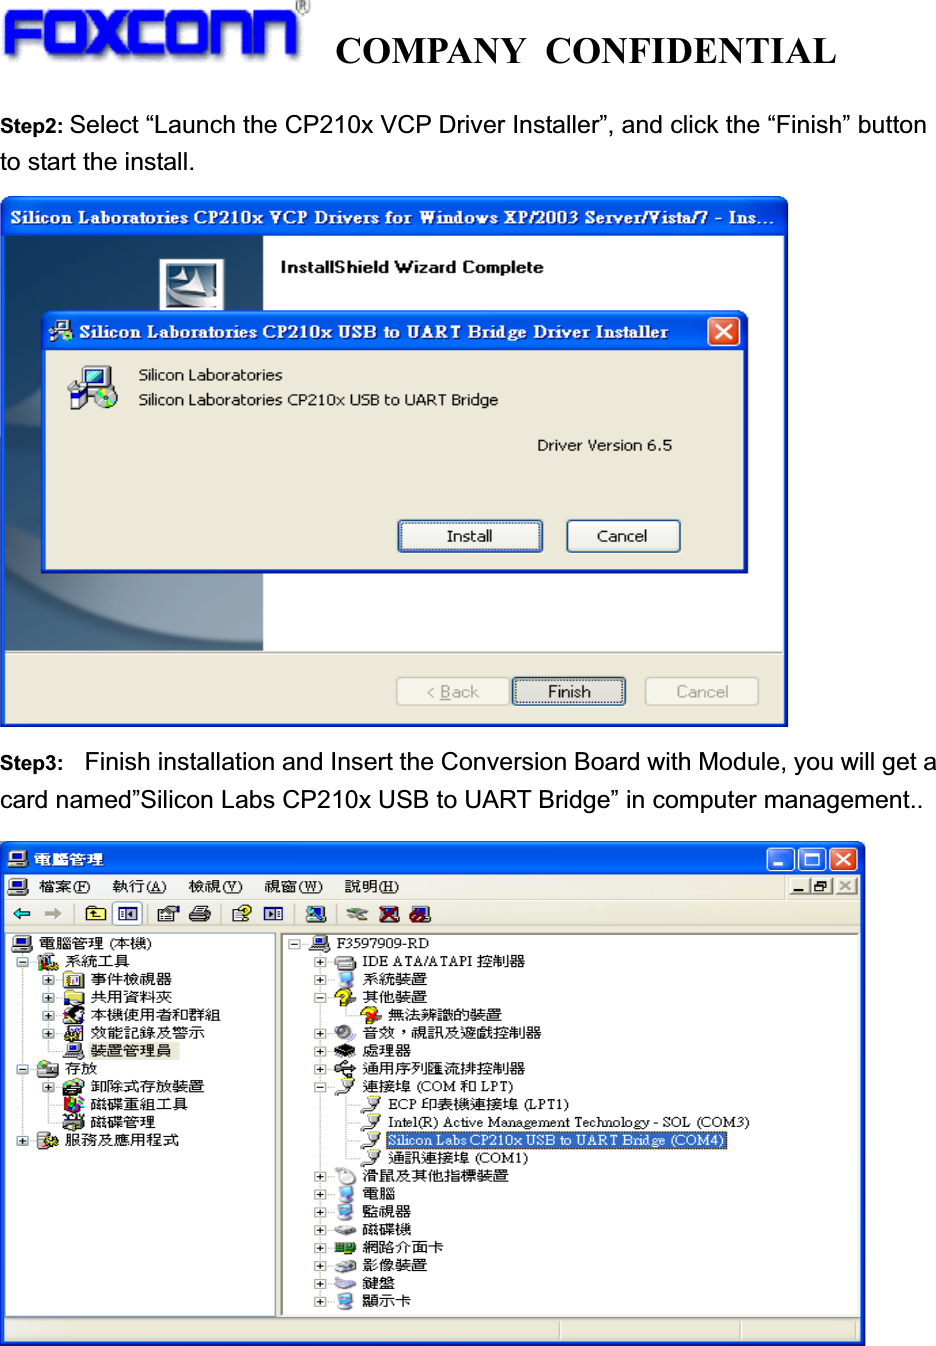   COMPANY CONFIDENTIAL             Step2: Select “Launch the CP210x VCP Driver Installer”, and click the “Finish” button to start the install. Step3:  Finish installation and Insert the Conversion Board with Module, you will get a card named”Silicon Labs CP210x USB to UART Bridge” in computer management.. 